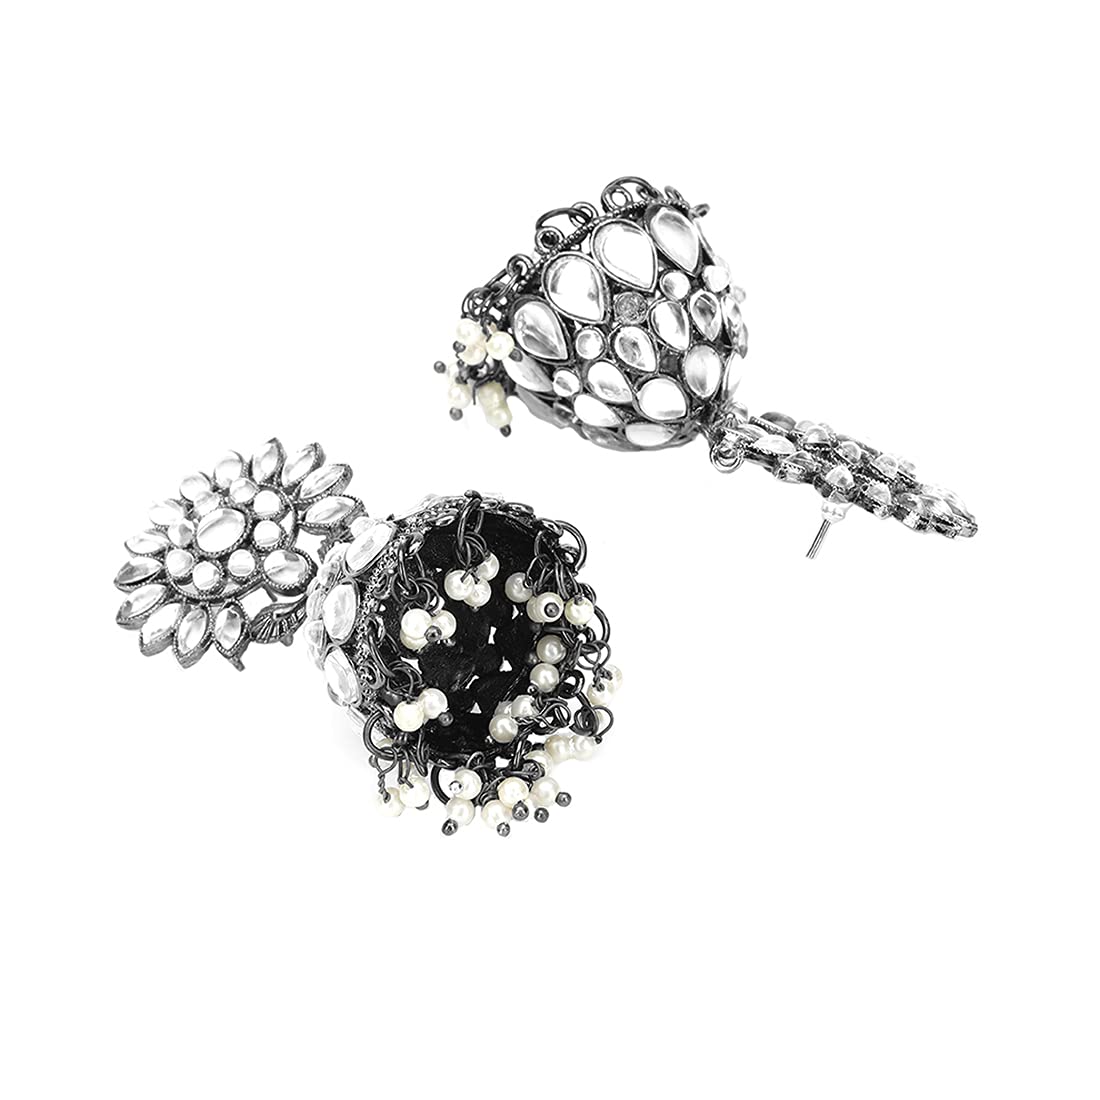 Yellow Chimes Black Gun Plated Studded Stones Flower Design Traditional Jhumka Earrings for Women And Girls, Medium (Model Number: YCTJER-87STLFJH-WH)